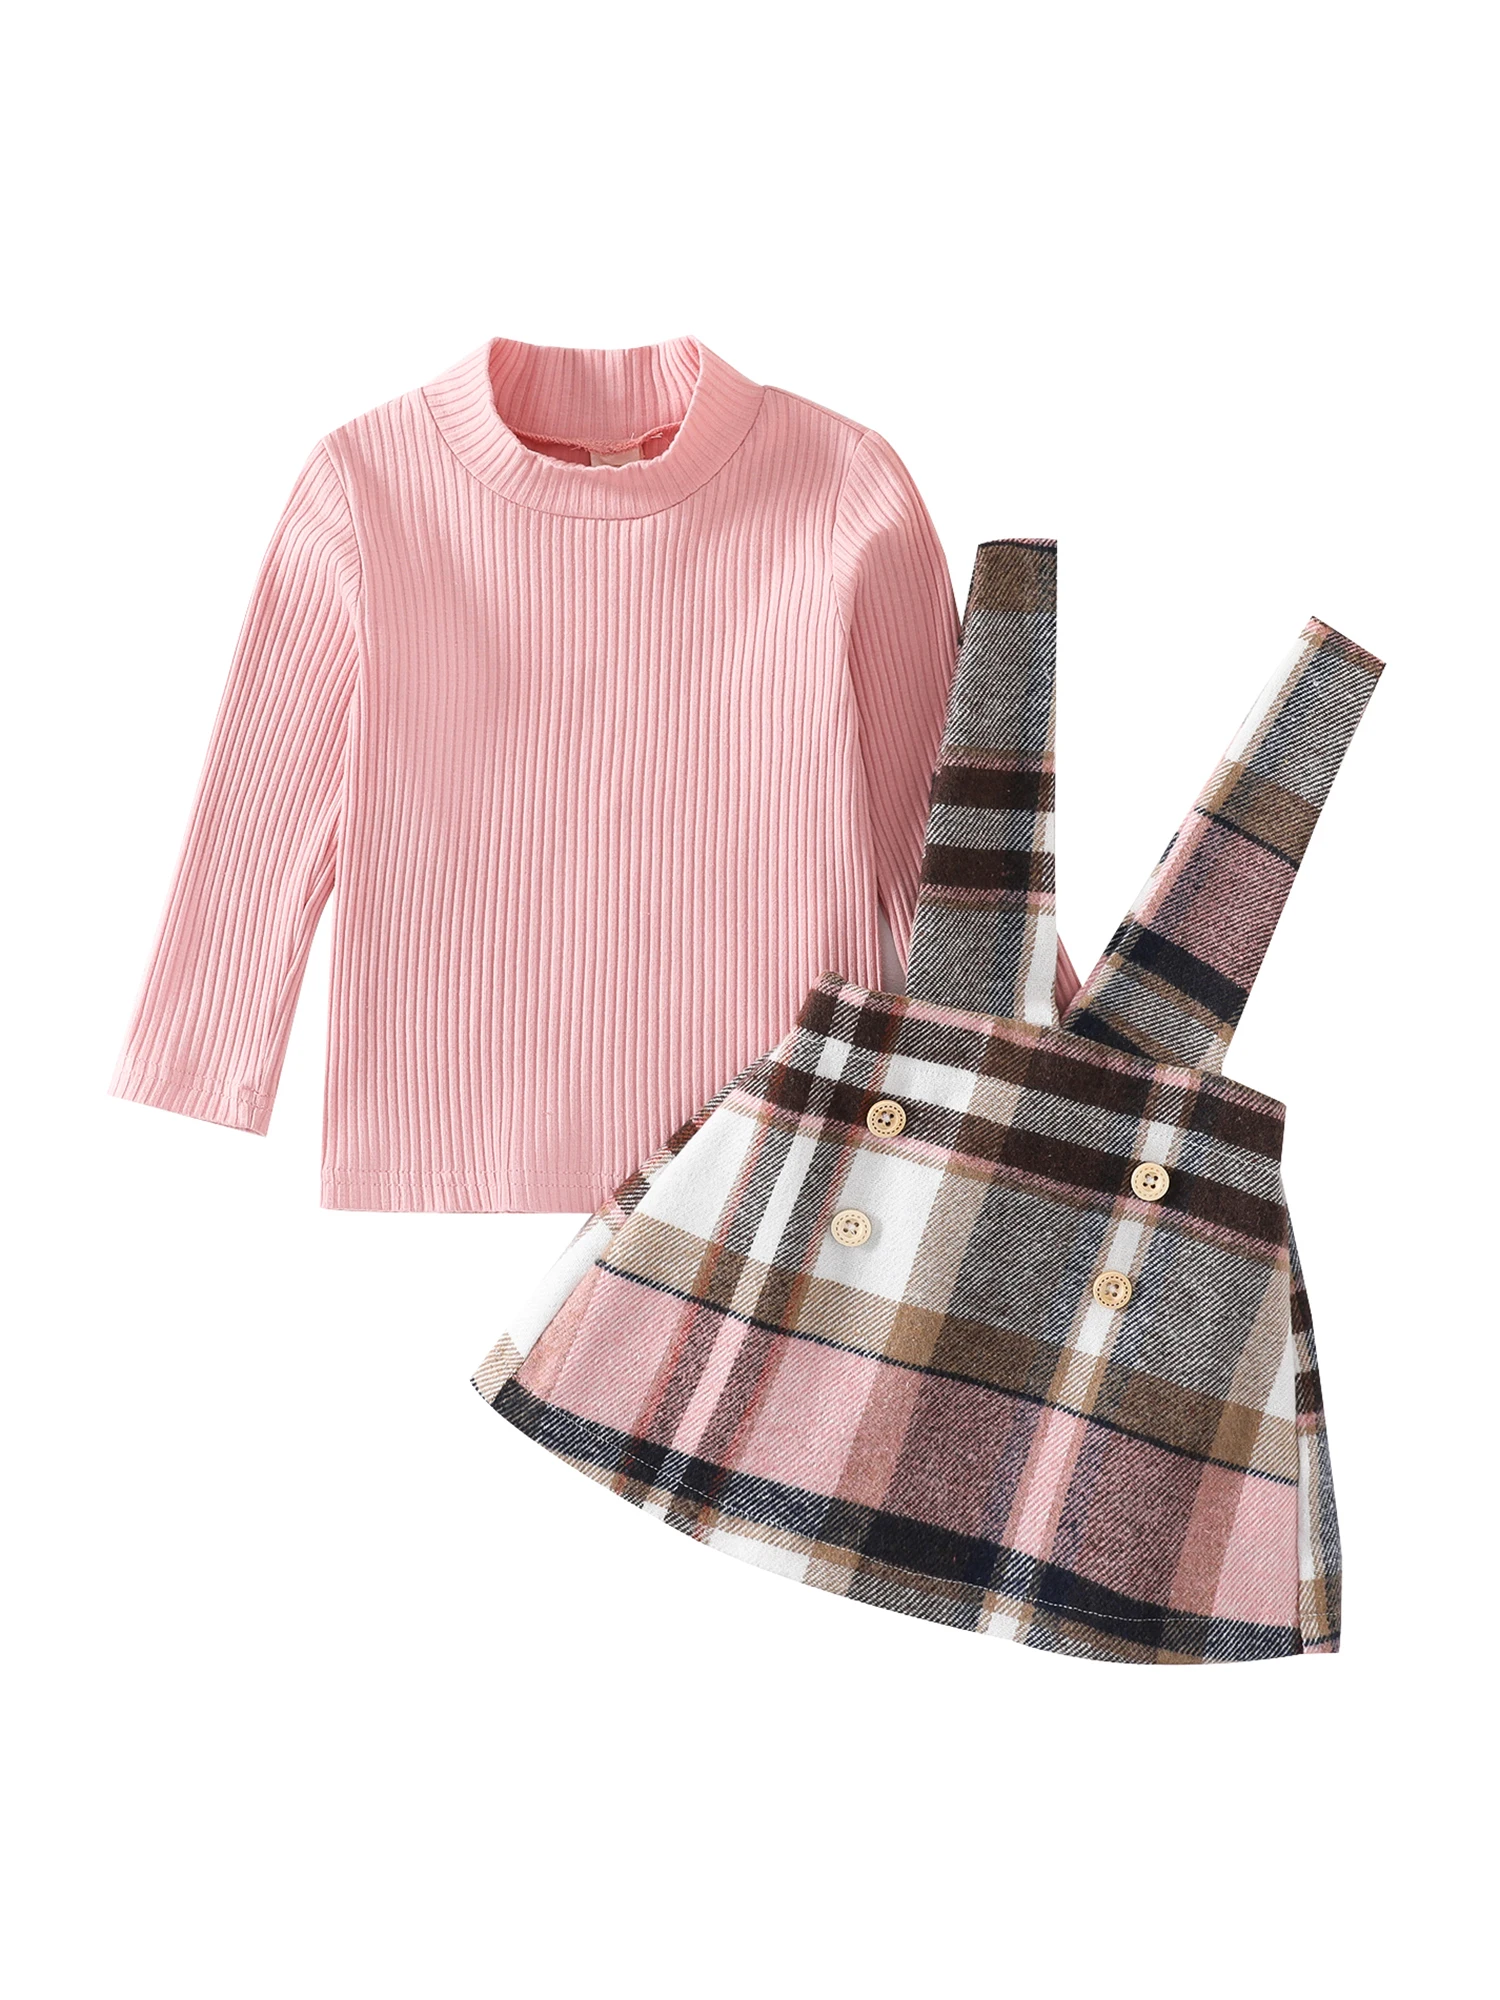 

Baby Girls Fall Winter 2Pcs Outfit Sets Ribbed Long Sleeve Pullover Tops Plaid Suspender Skirt 12 18 24M 2T 3T 4T 5T